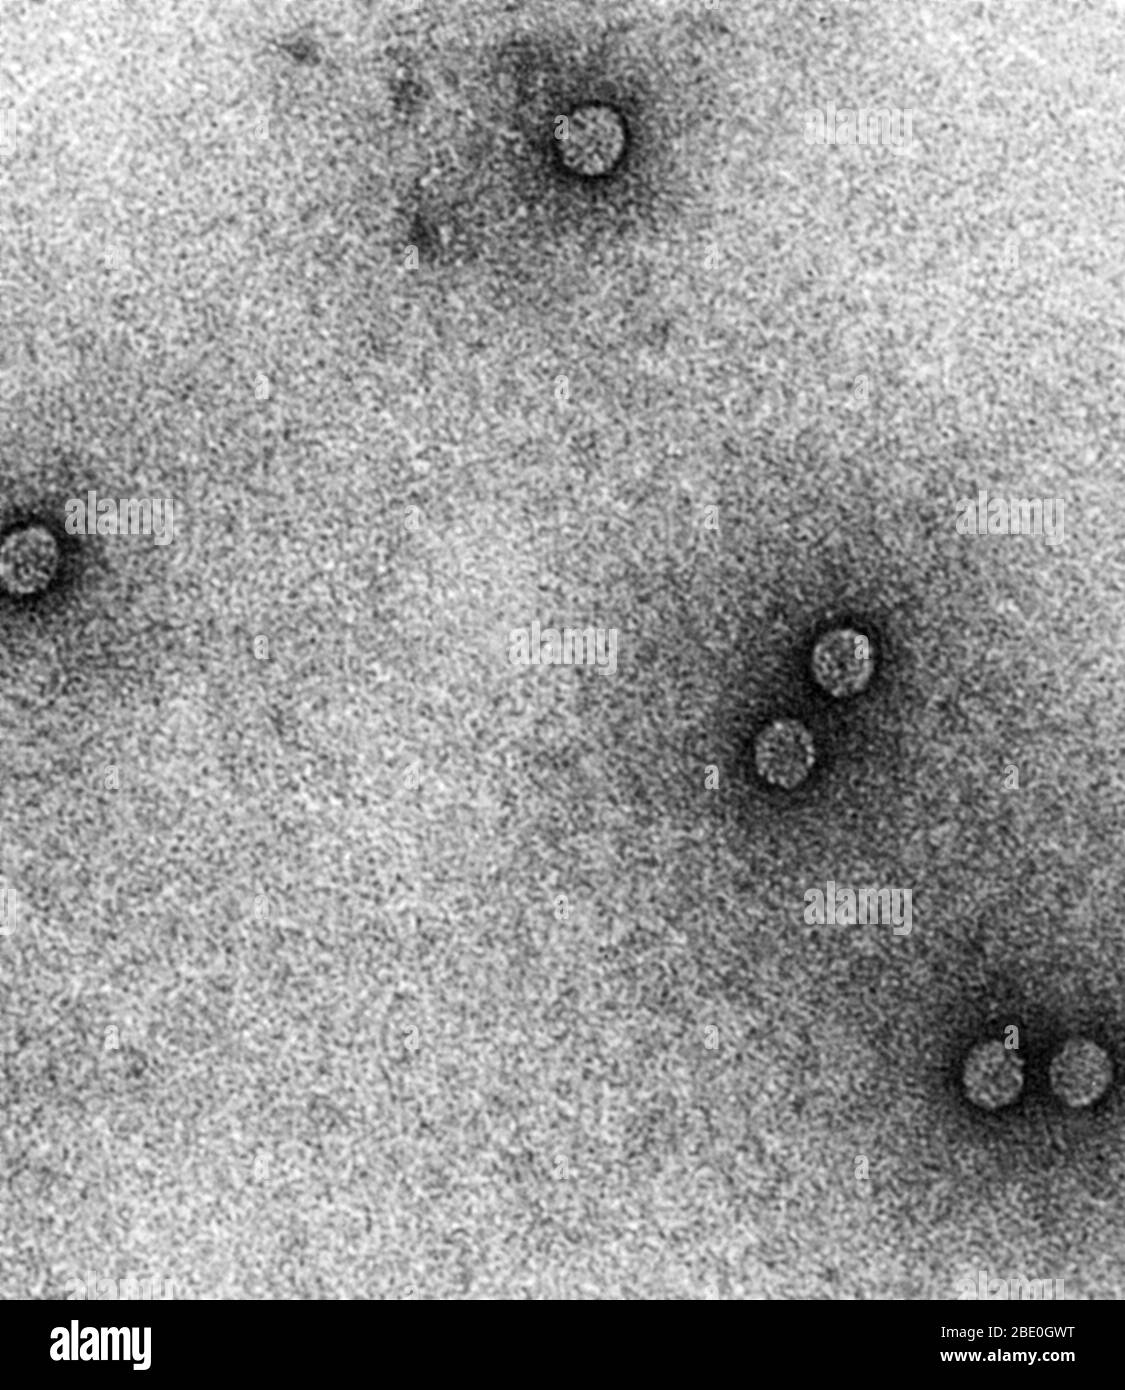 Transmission electron micrograph (TEM) of rhinoviruses, which cause the common cold.  Magnification: x200,000. Stock Photo